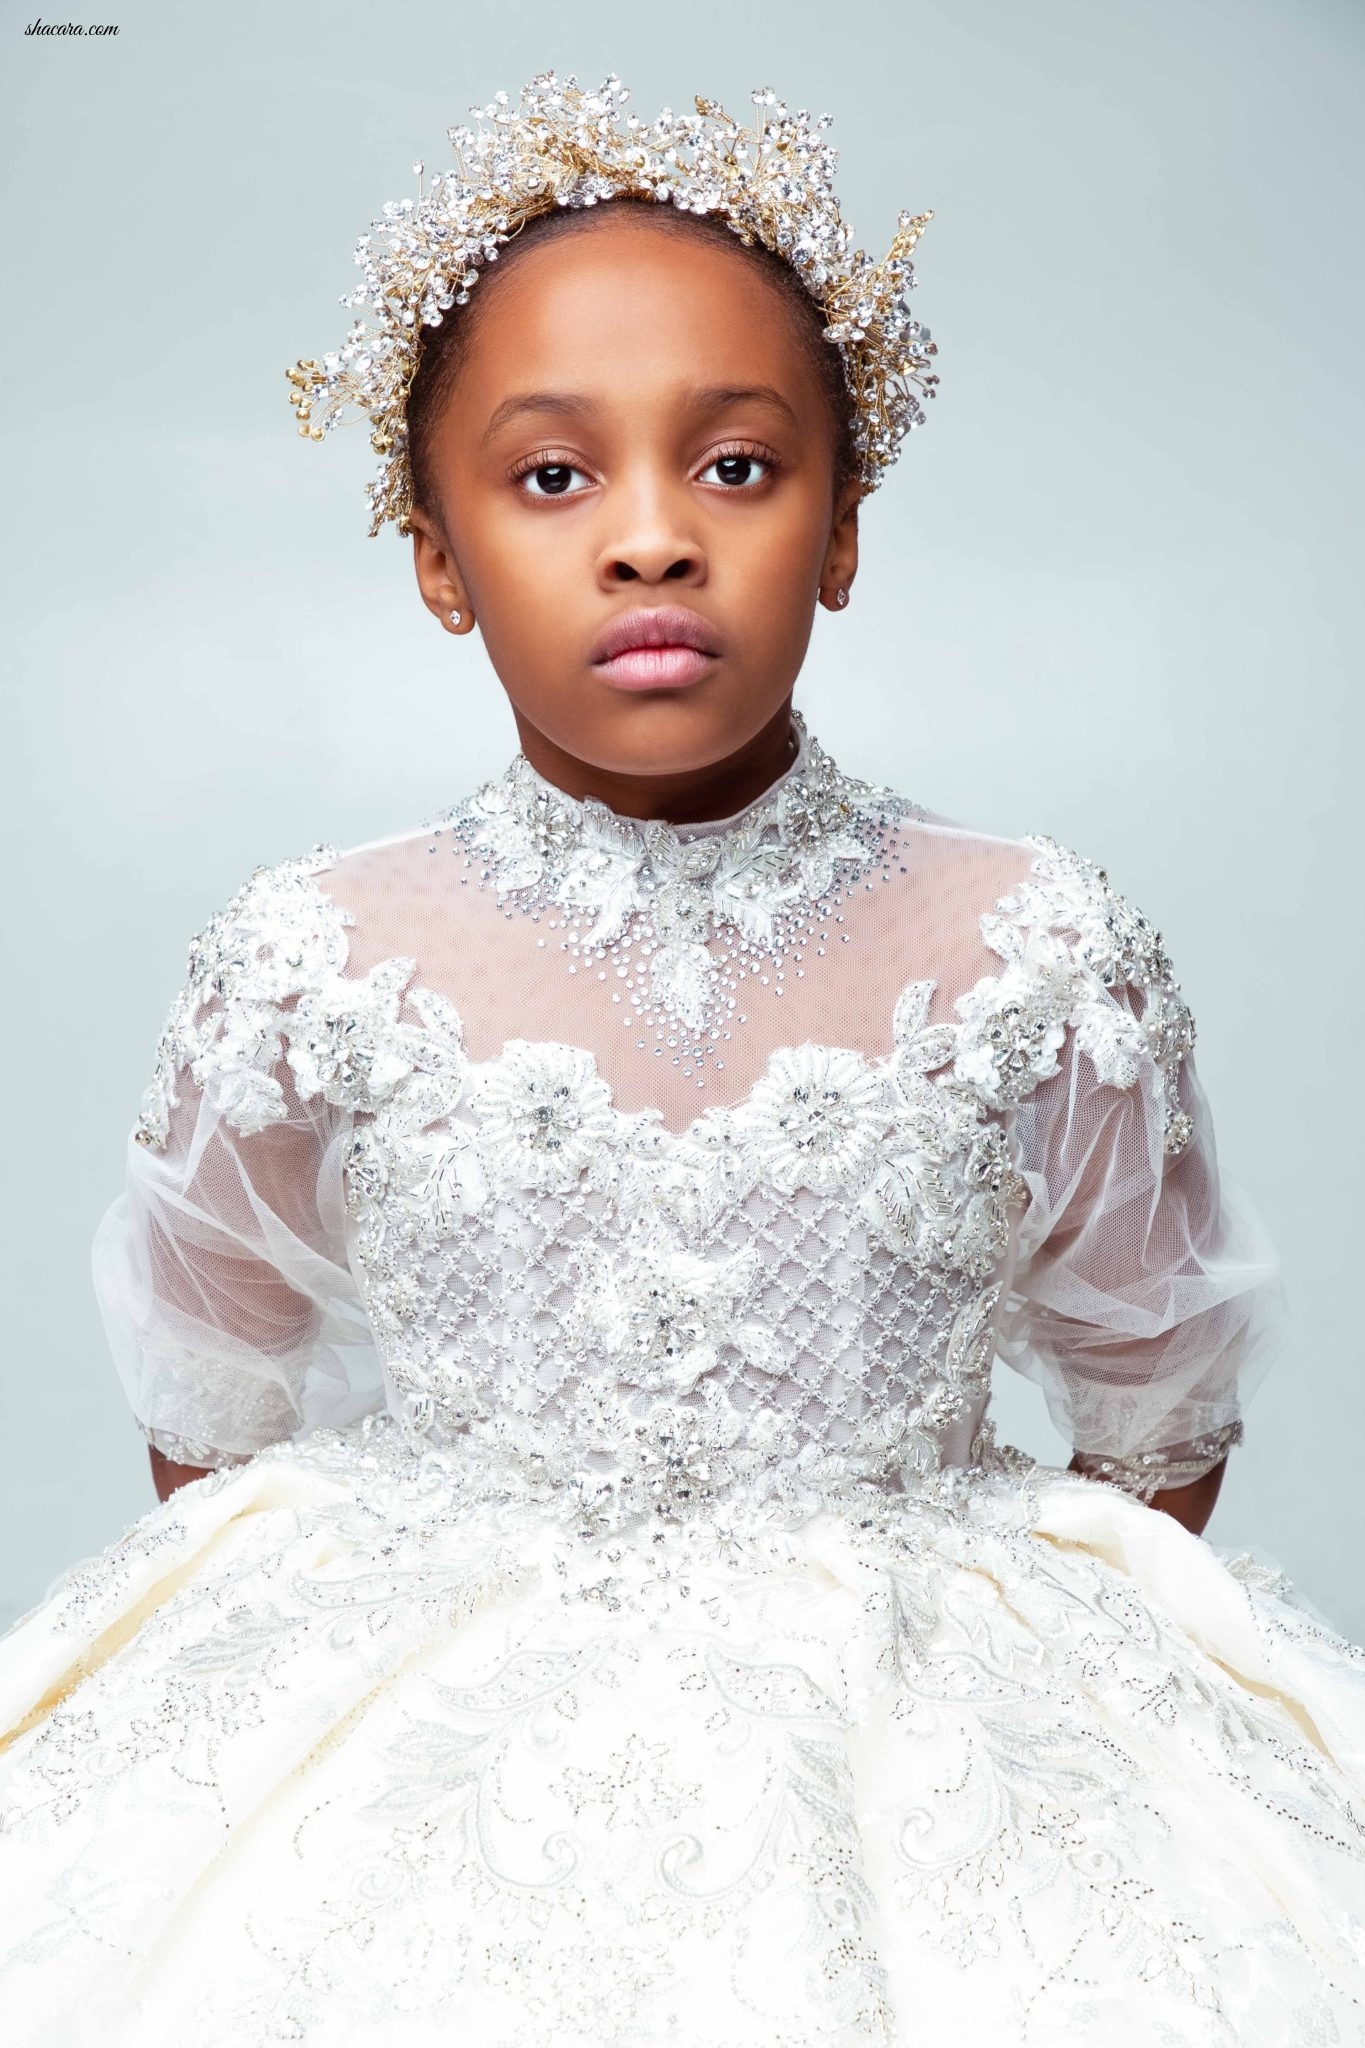 Luxury Childrenswear Brand, Fara and O’ma Launches Dreamy Debut Collection